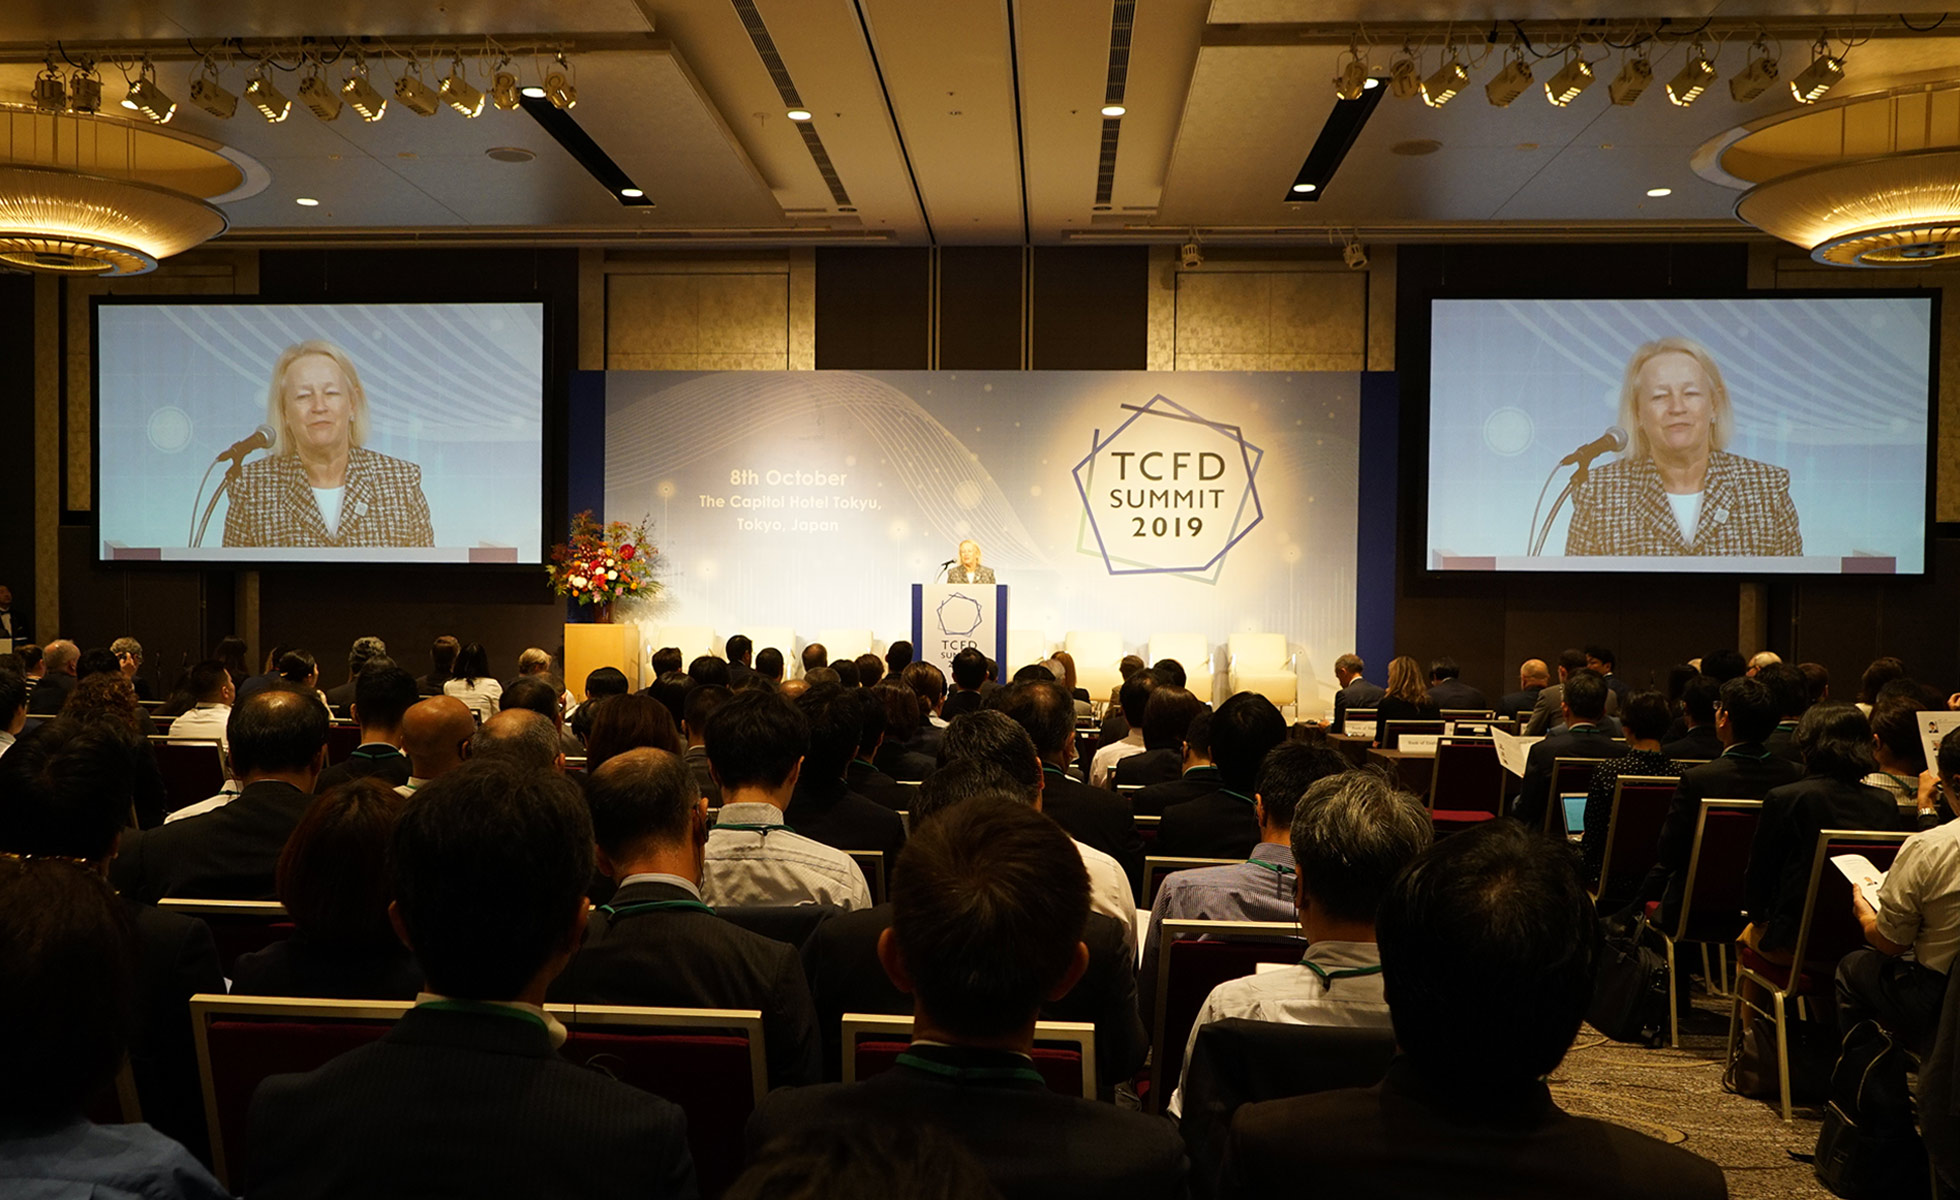 From TCFD SUMMIT 201